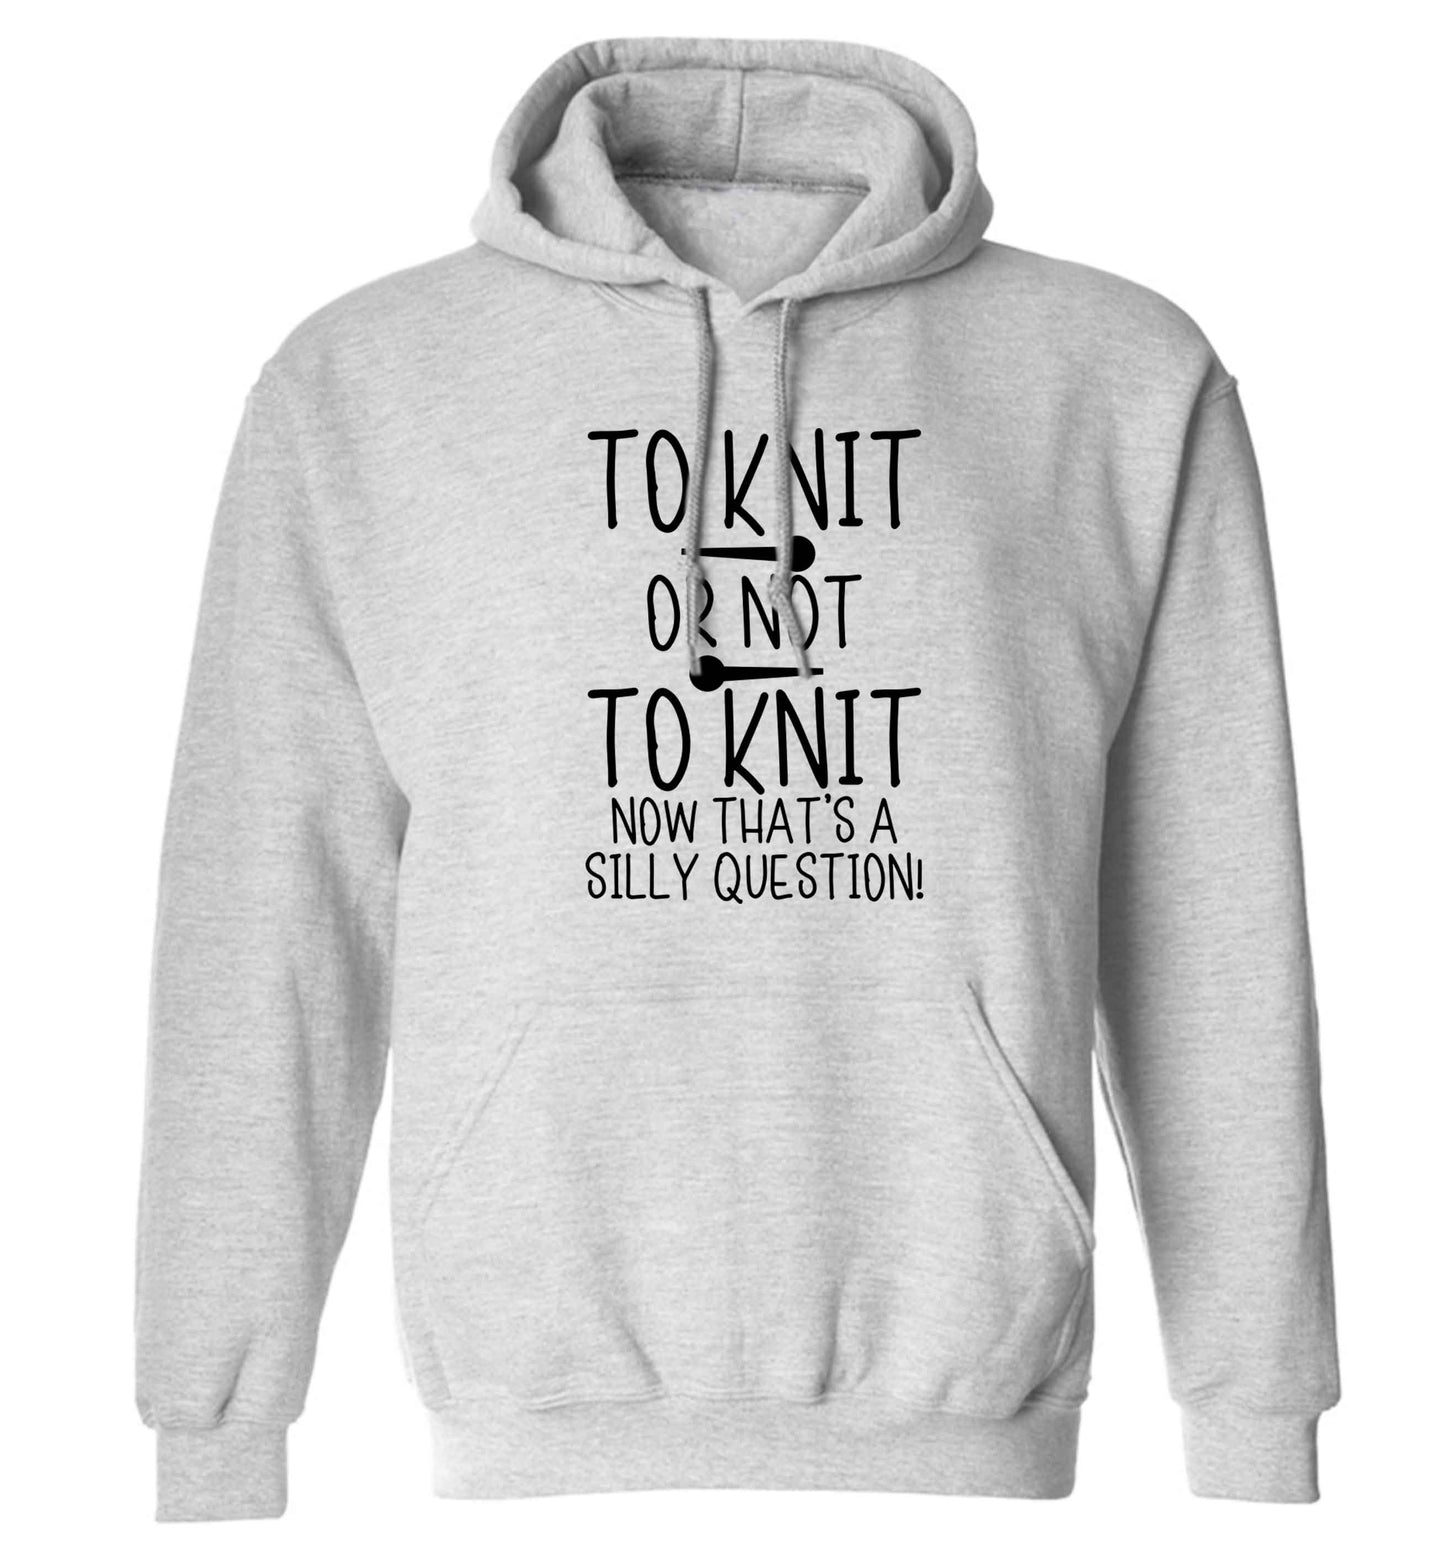 To knit or not to knit now that's a silly question adults unisex grey hoodie 2XL